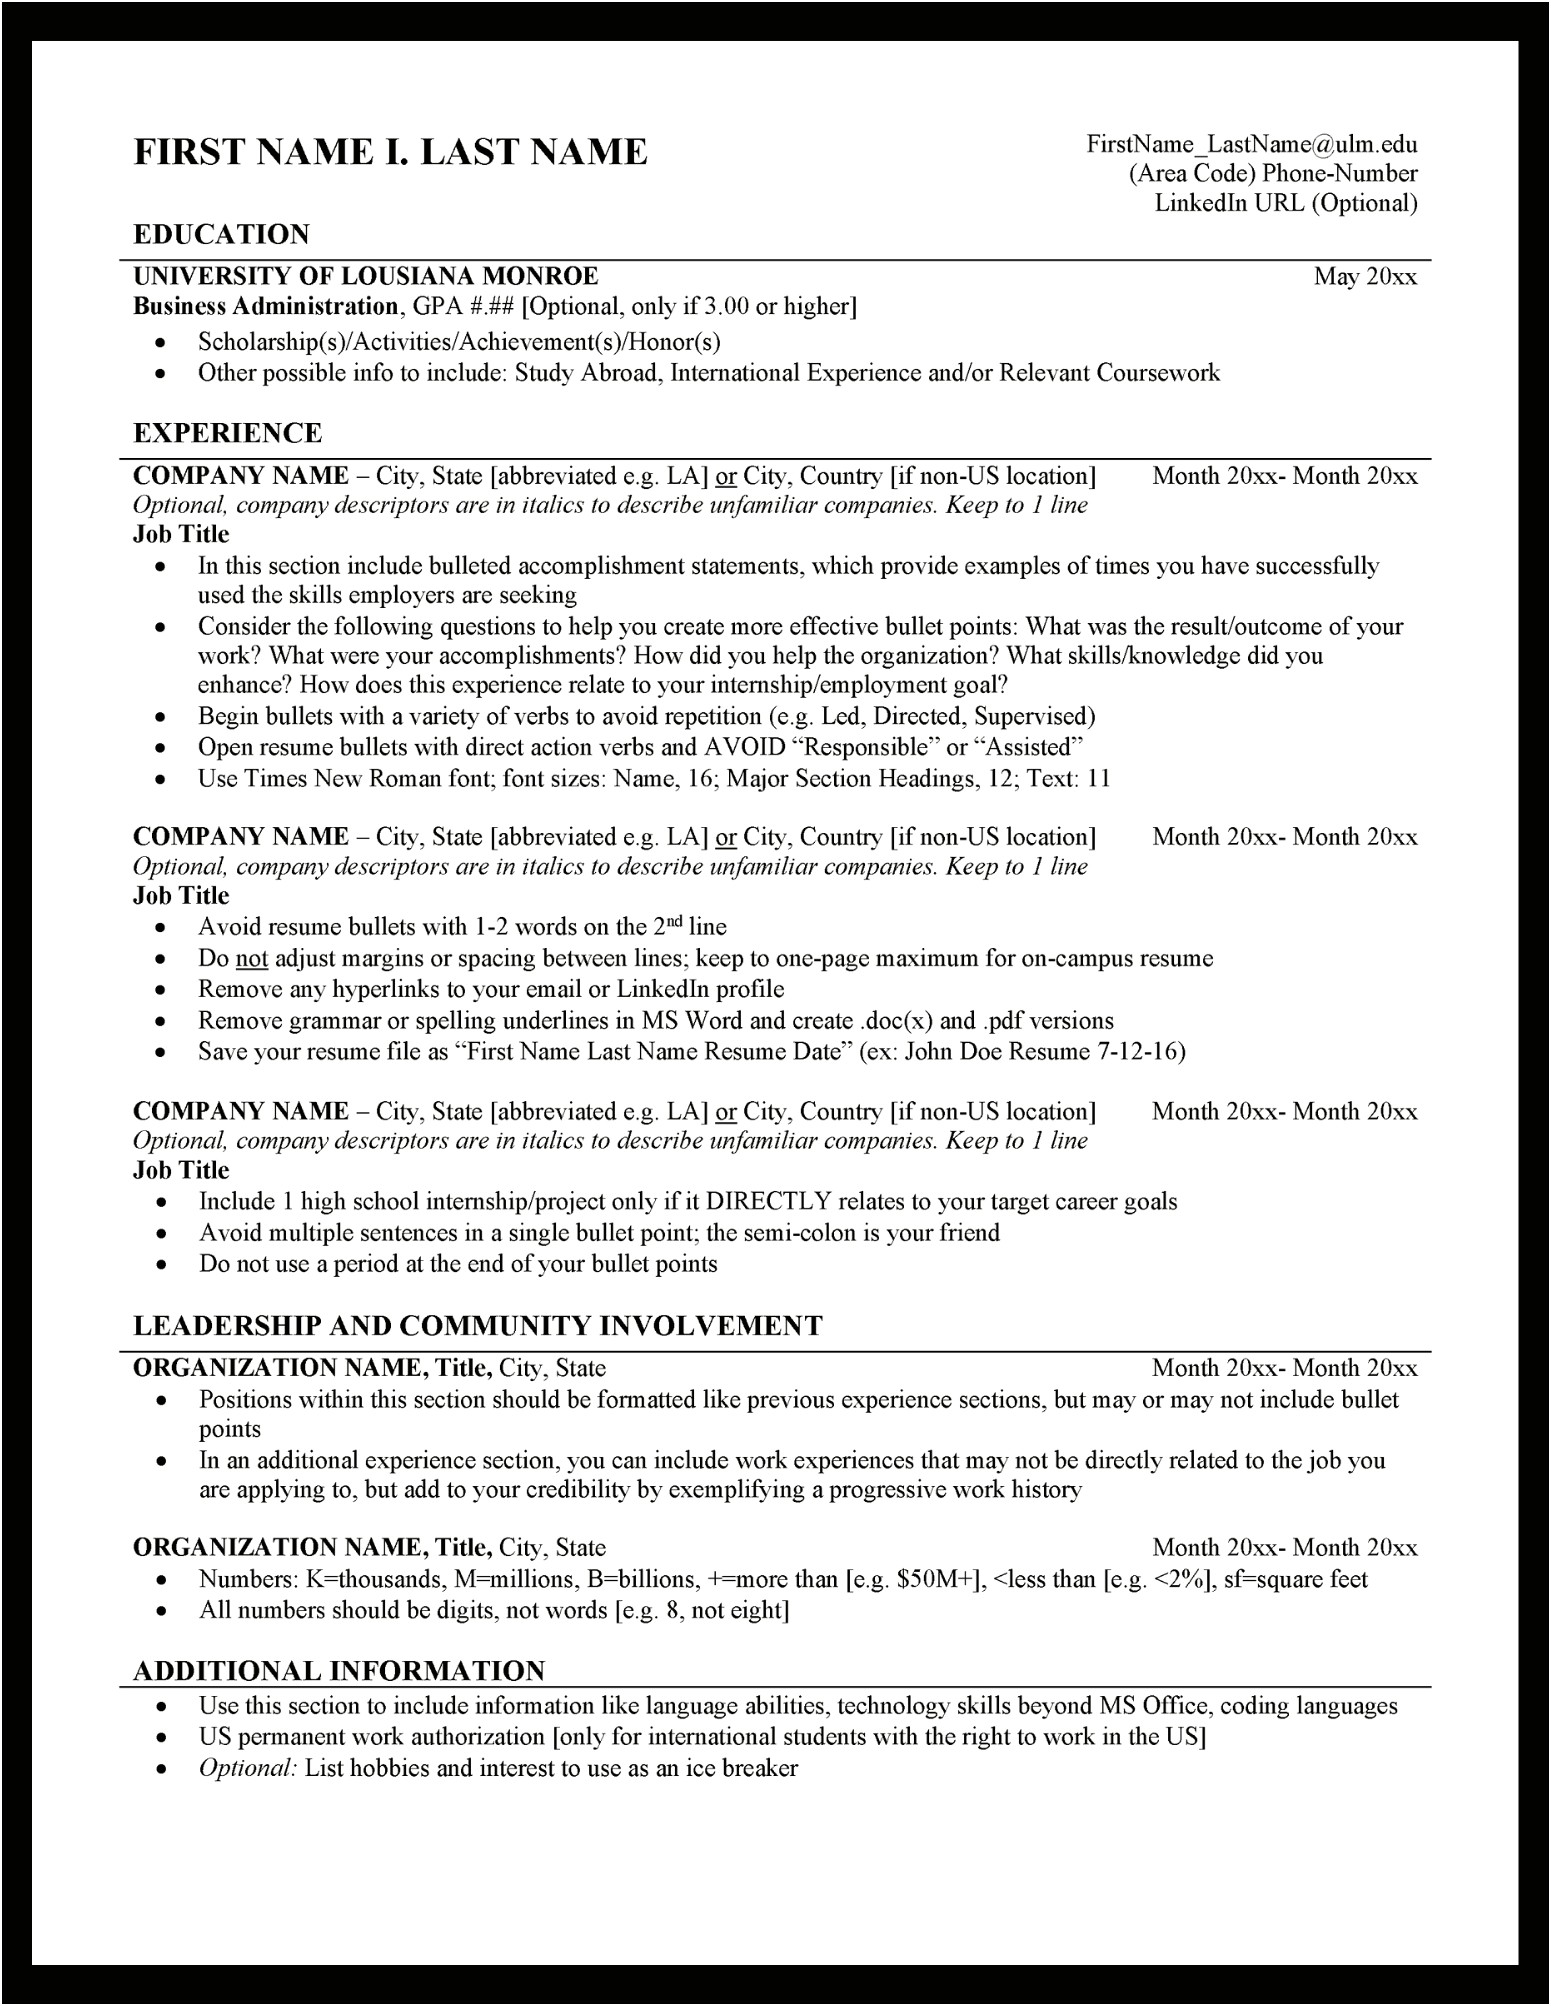 Where To Find Resume Templates For Veterans